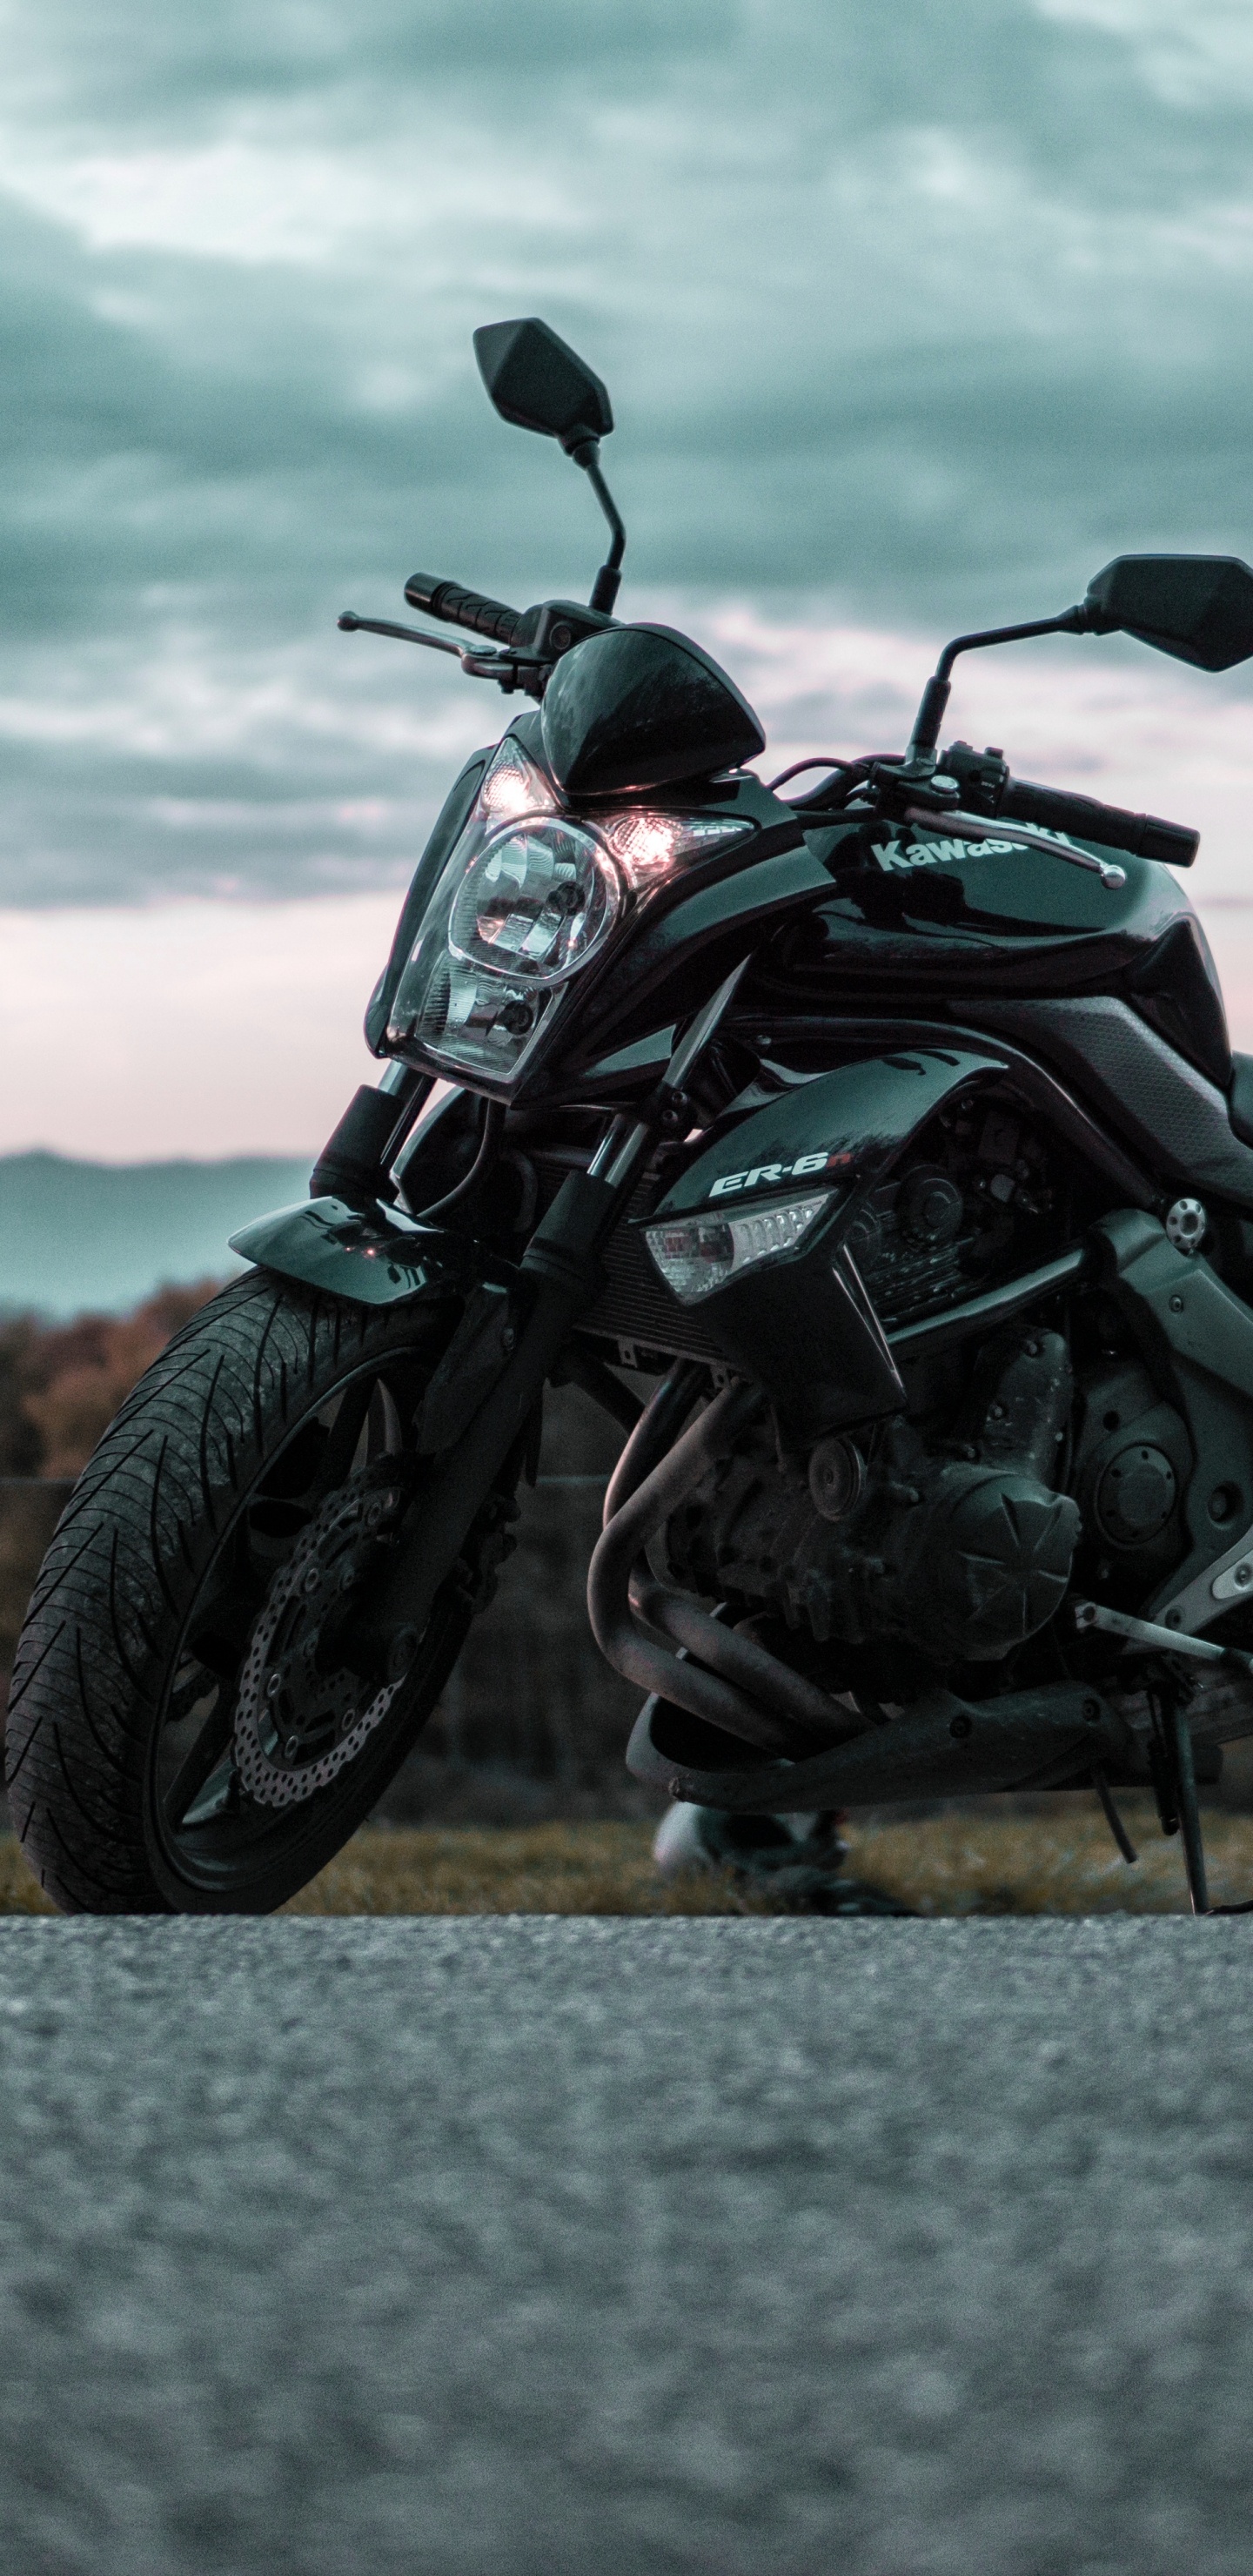 Black and Gray Motorcycle on Gray Asphalt Road During Daytime. Wallpaper in 1440x2960 Resolution